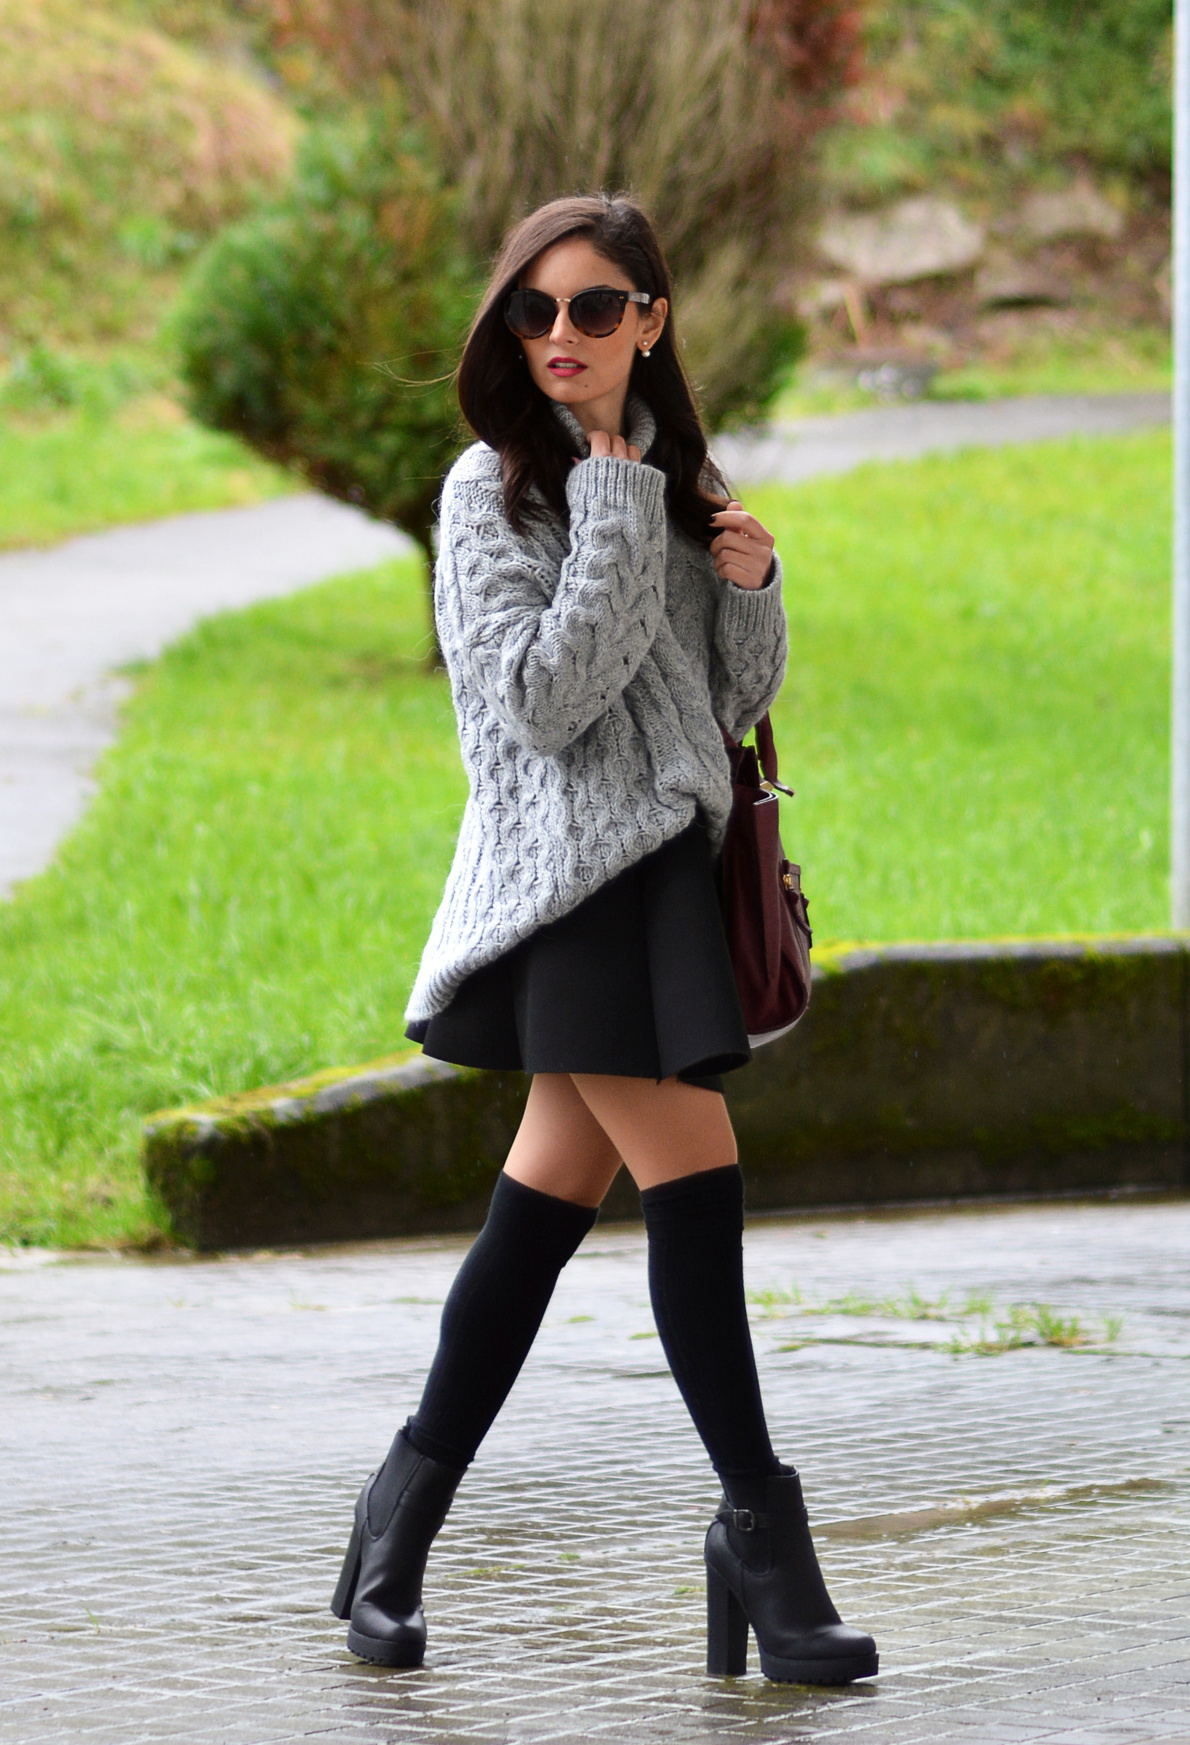 16 Stylish Ways to Wear a Skater Skirt This Winter - fashionsy.com